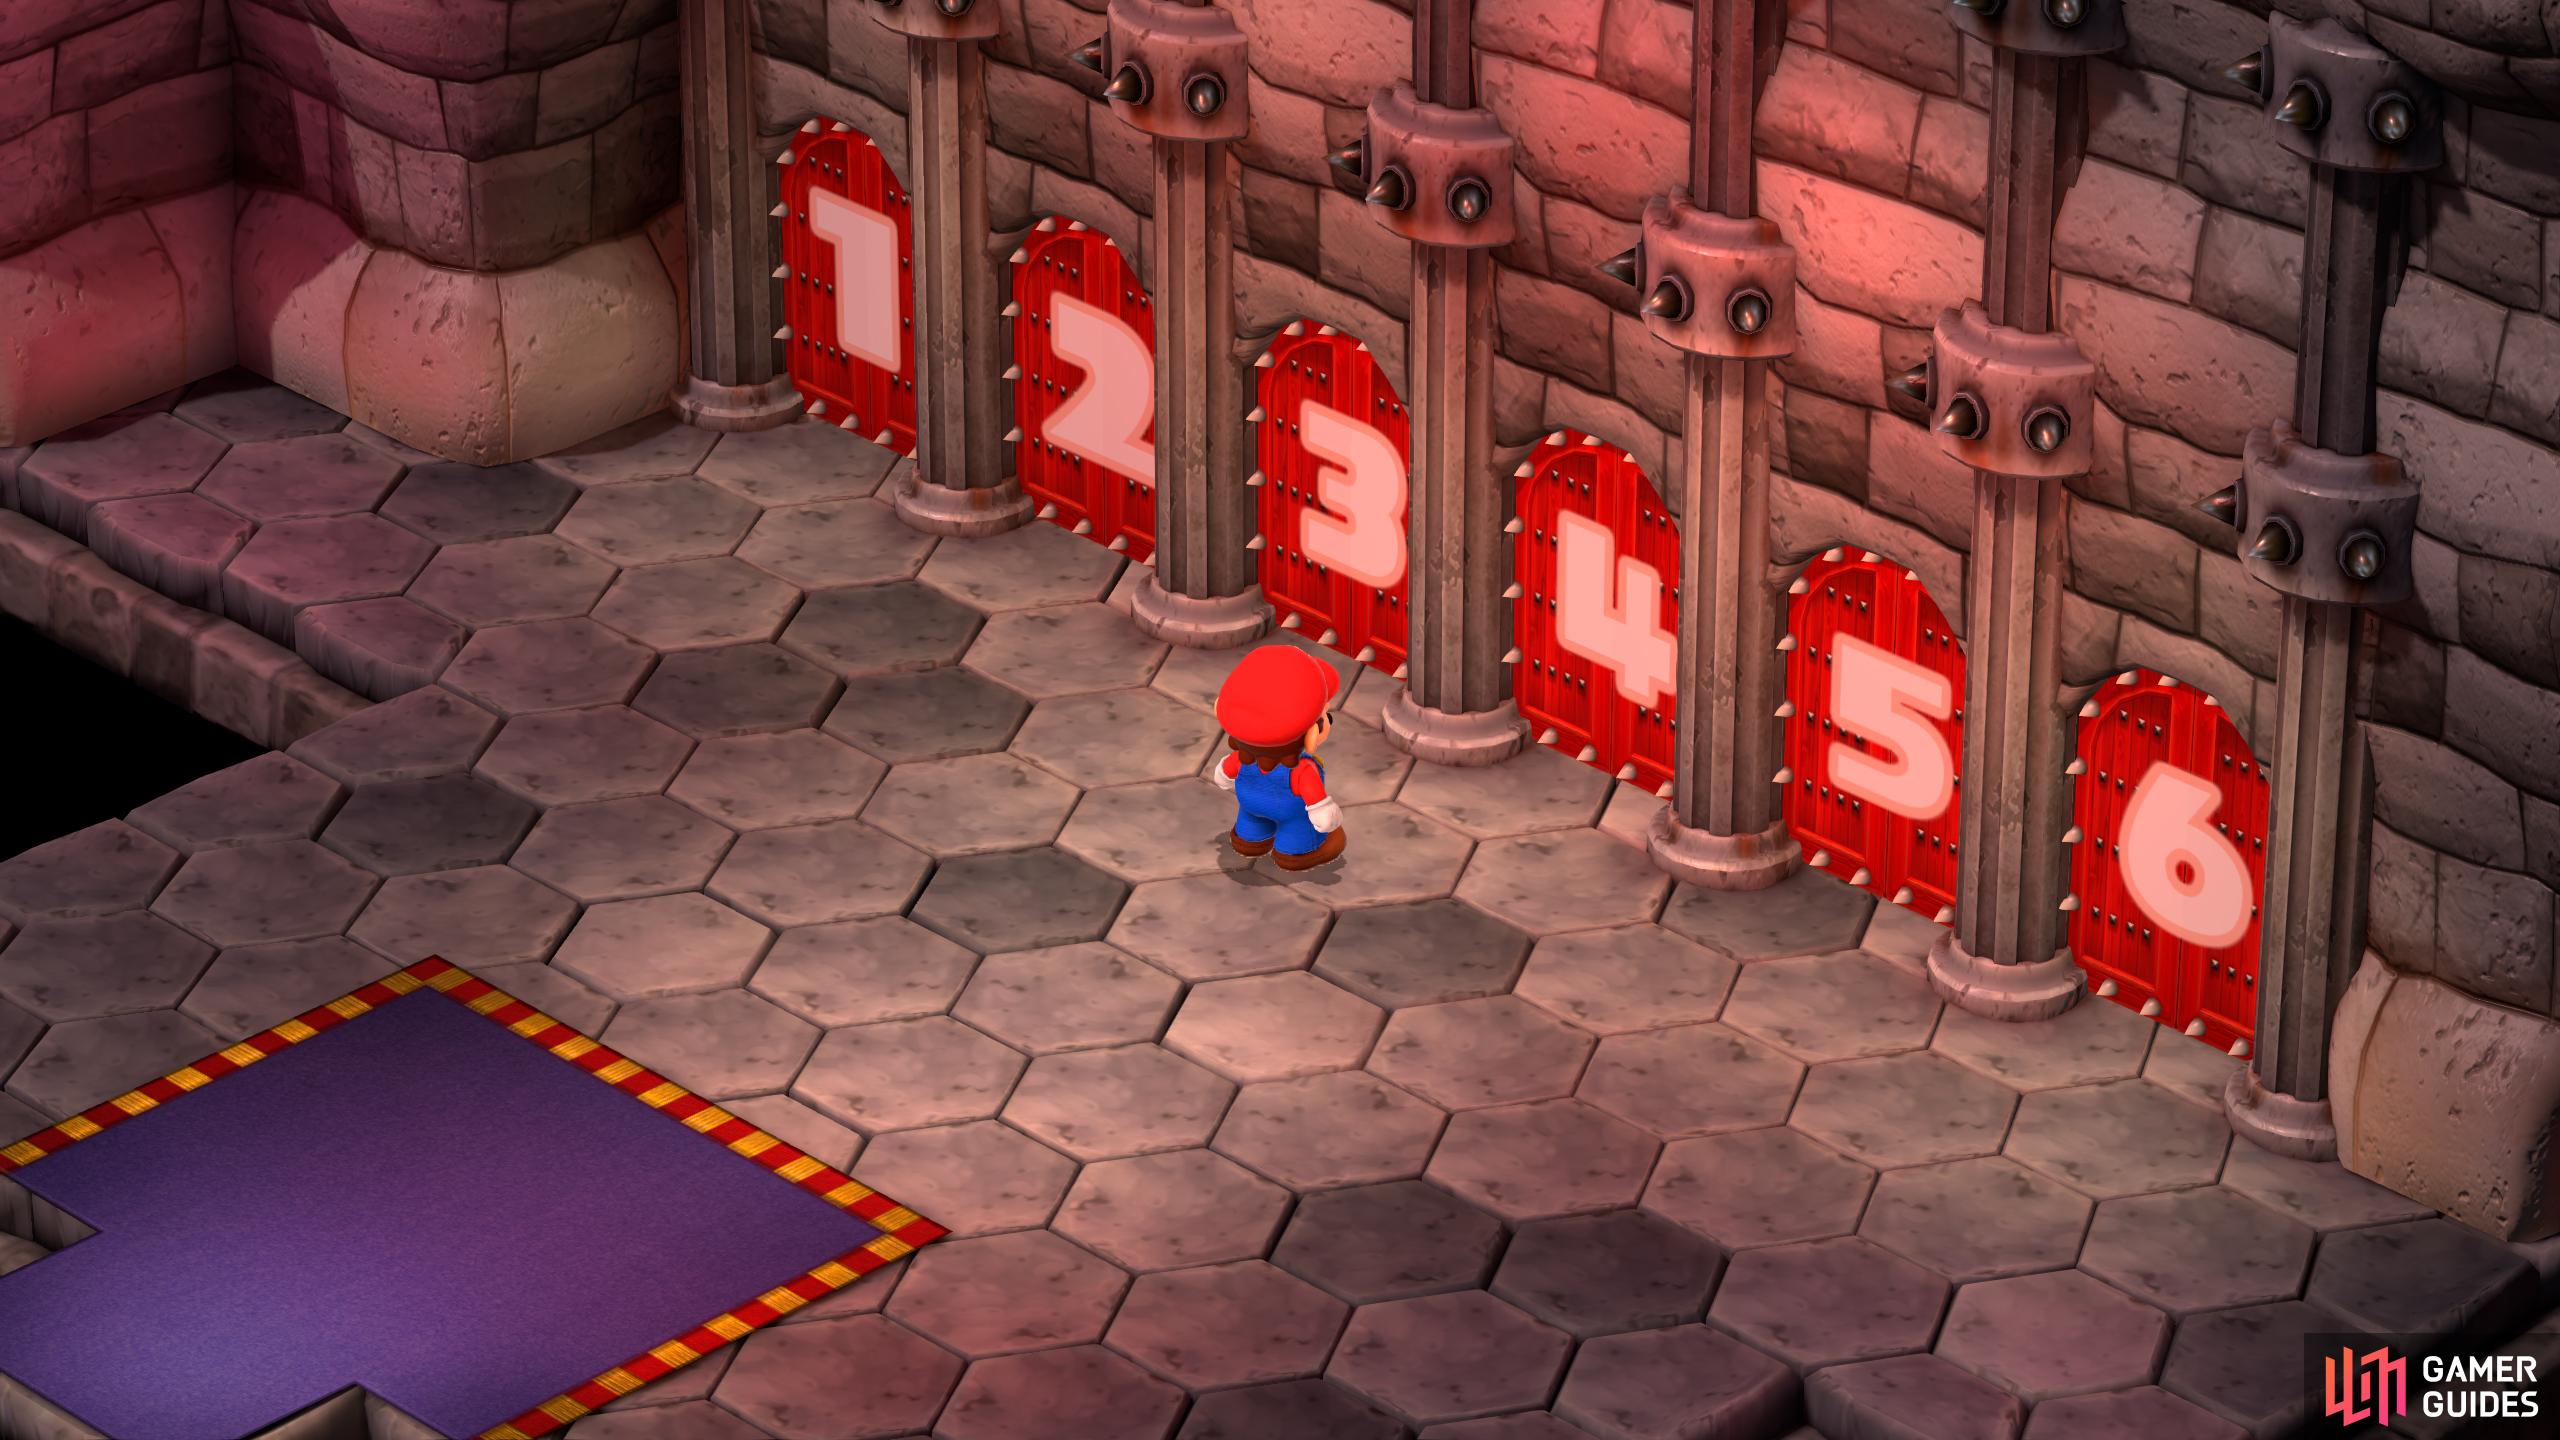 In Bowser’s Keep, there are six doors, all with puzzles, battles, or platforming. Four of these doors reward you with a weapon.